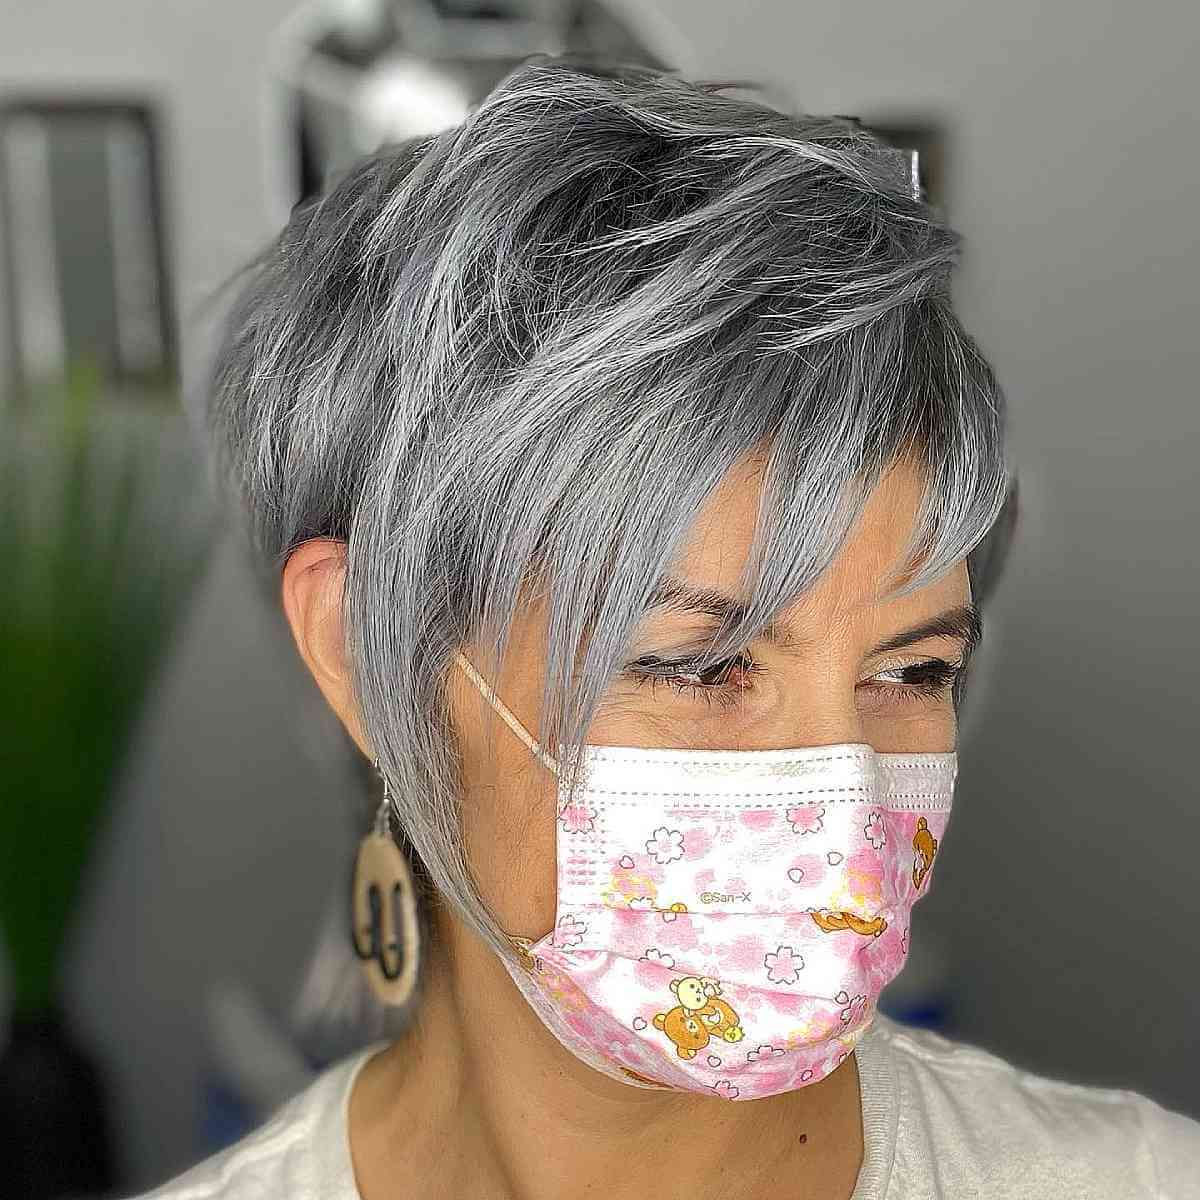 Textured Silver Pixie with Chunky Bangs